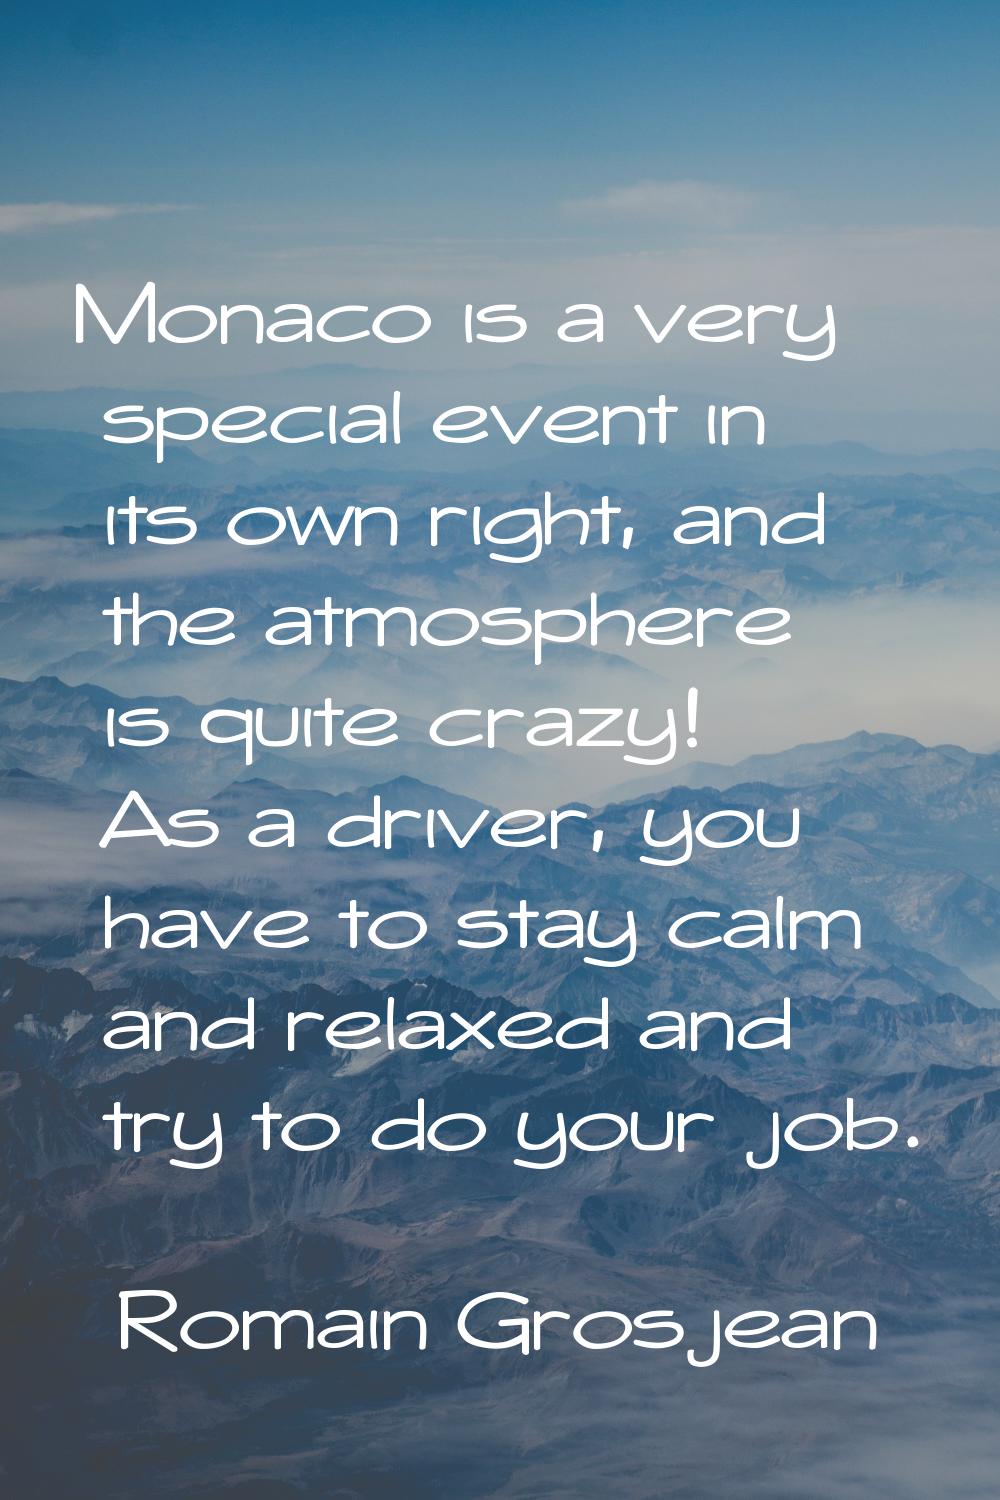 Monaco is a very special event in its own right, and the atmosphere is quite crazy! As a driver, yo